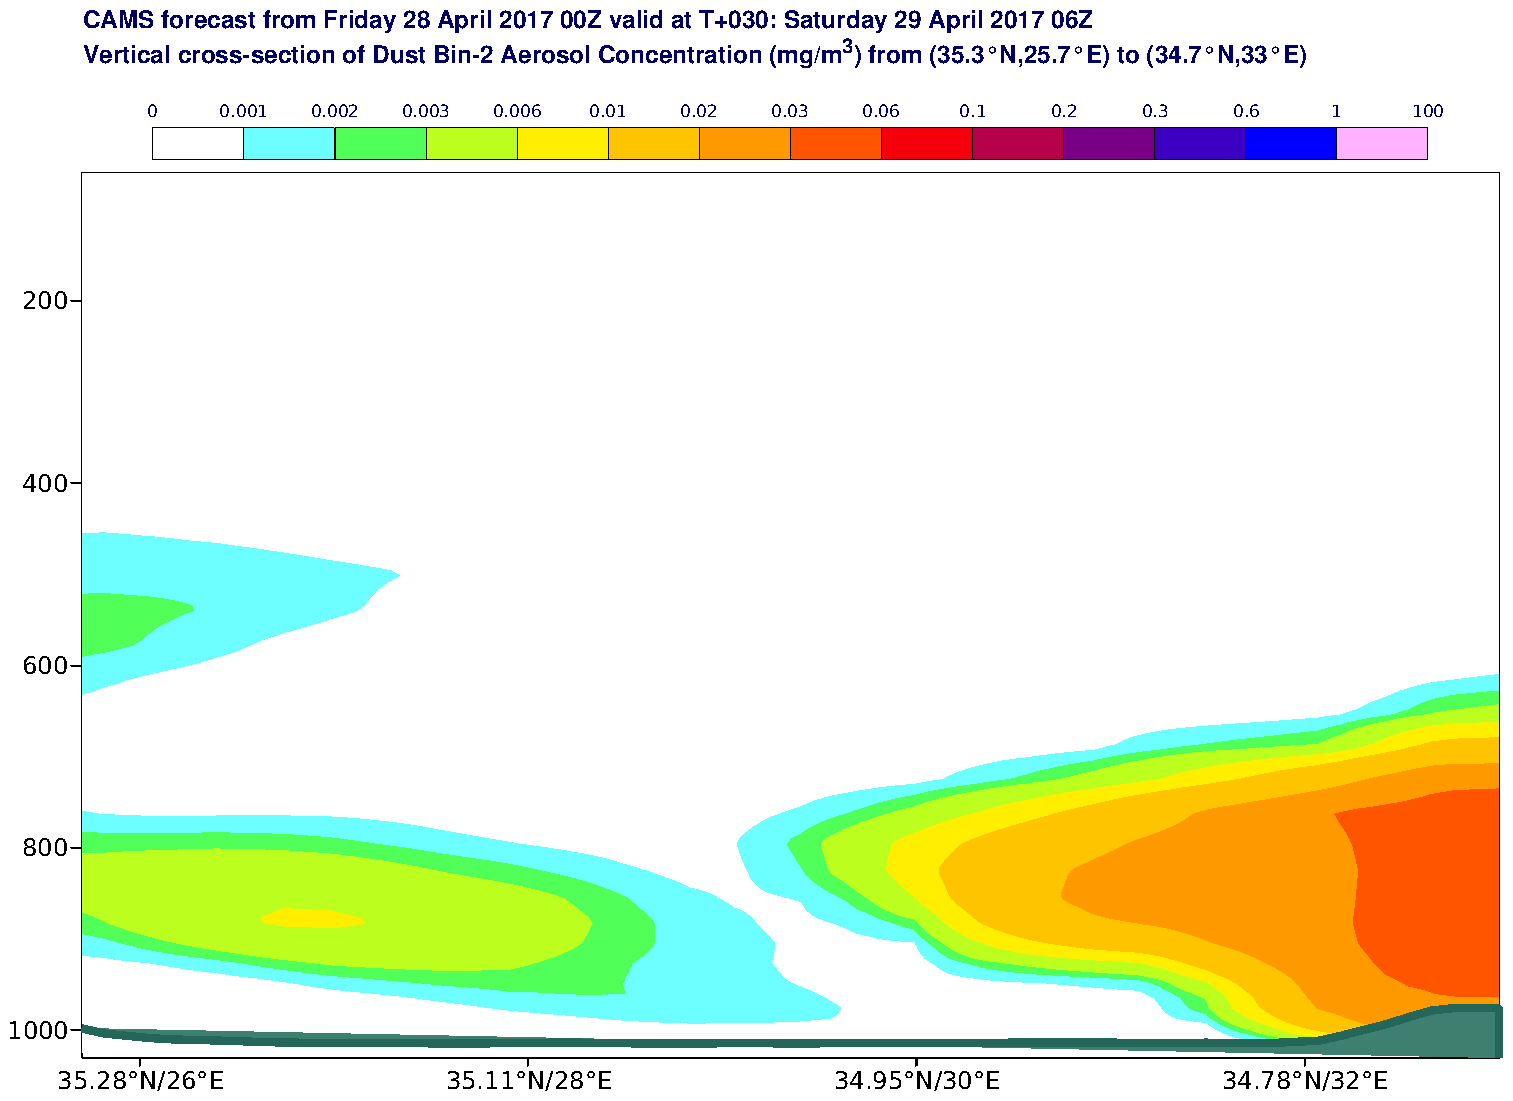 Vertical cross-section of Dust Bin-2 Aerosol Concentration (mg/m3) valid at T30 - 2017-04-29 06:00